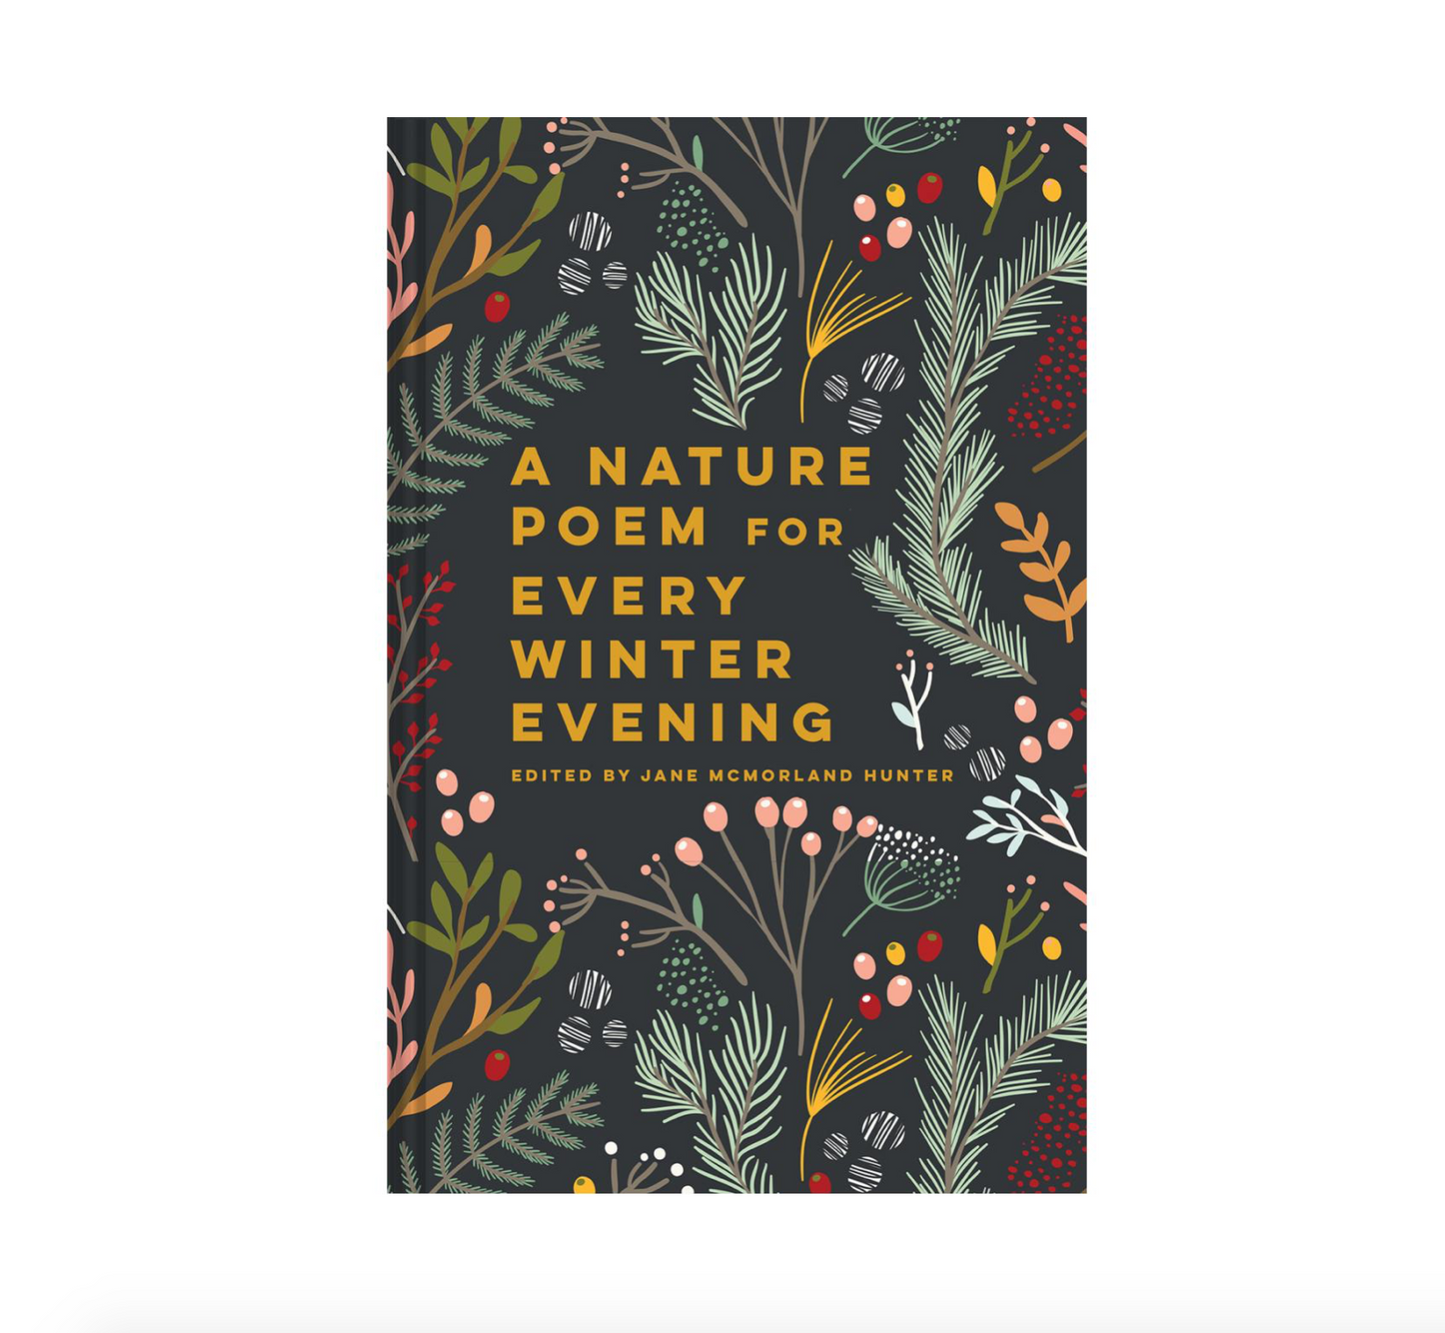 A nature poem for every winter evening